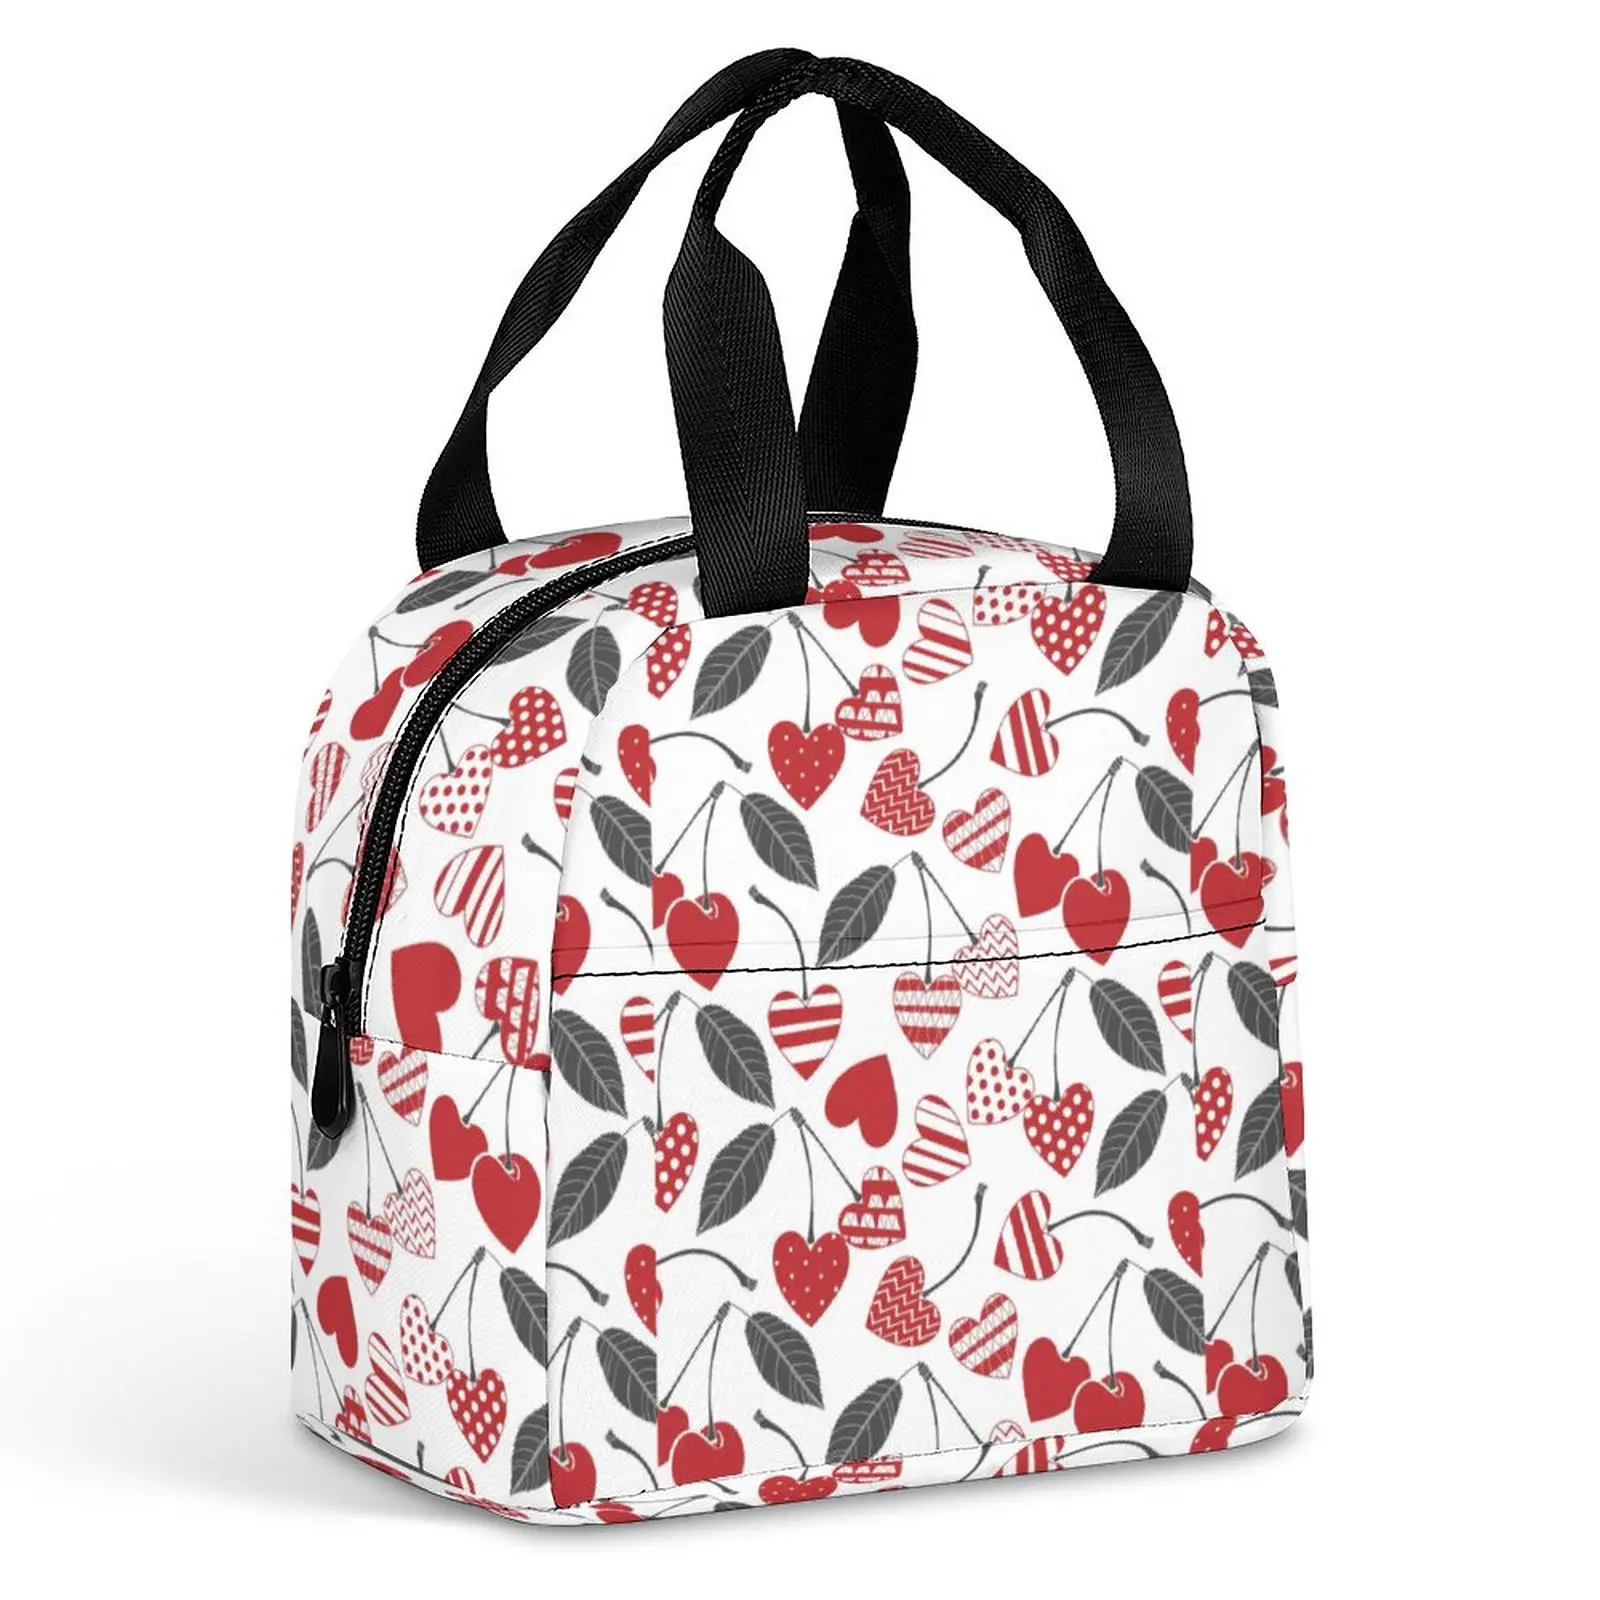 Custom Pattern Tote Lunch Bags for Women Love Cherry Print Portable Meal Bag Picnic Travel Breakfast Box Office Work School